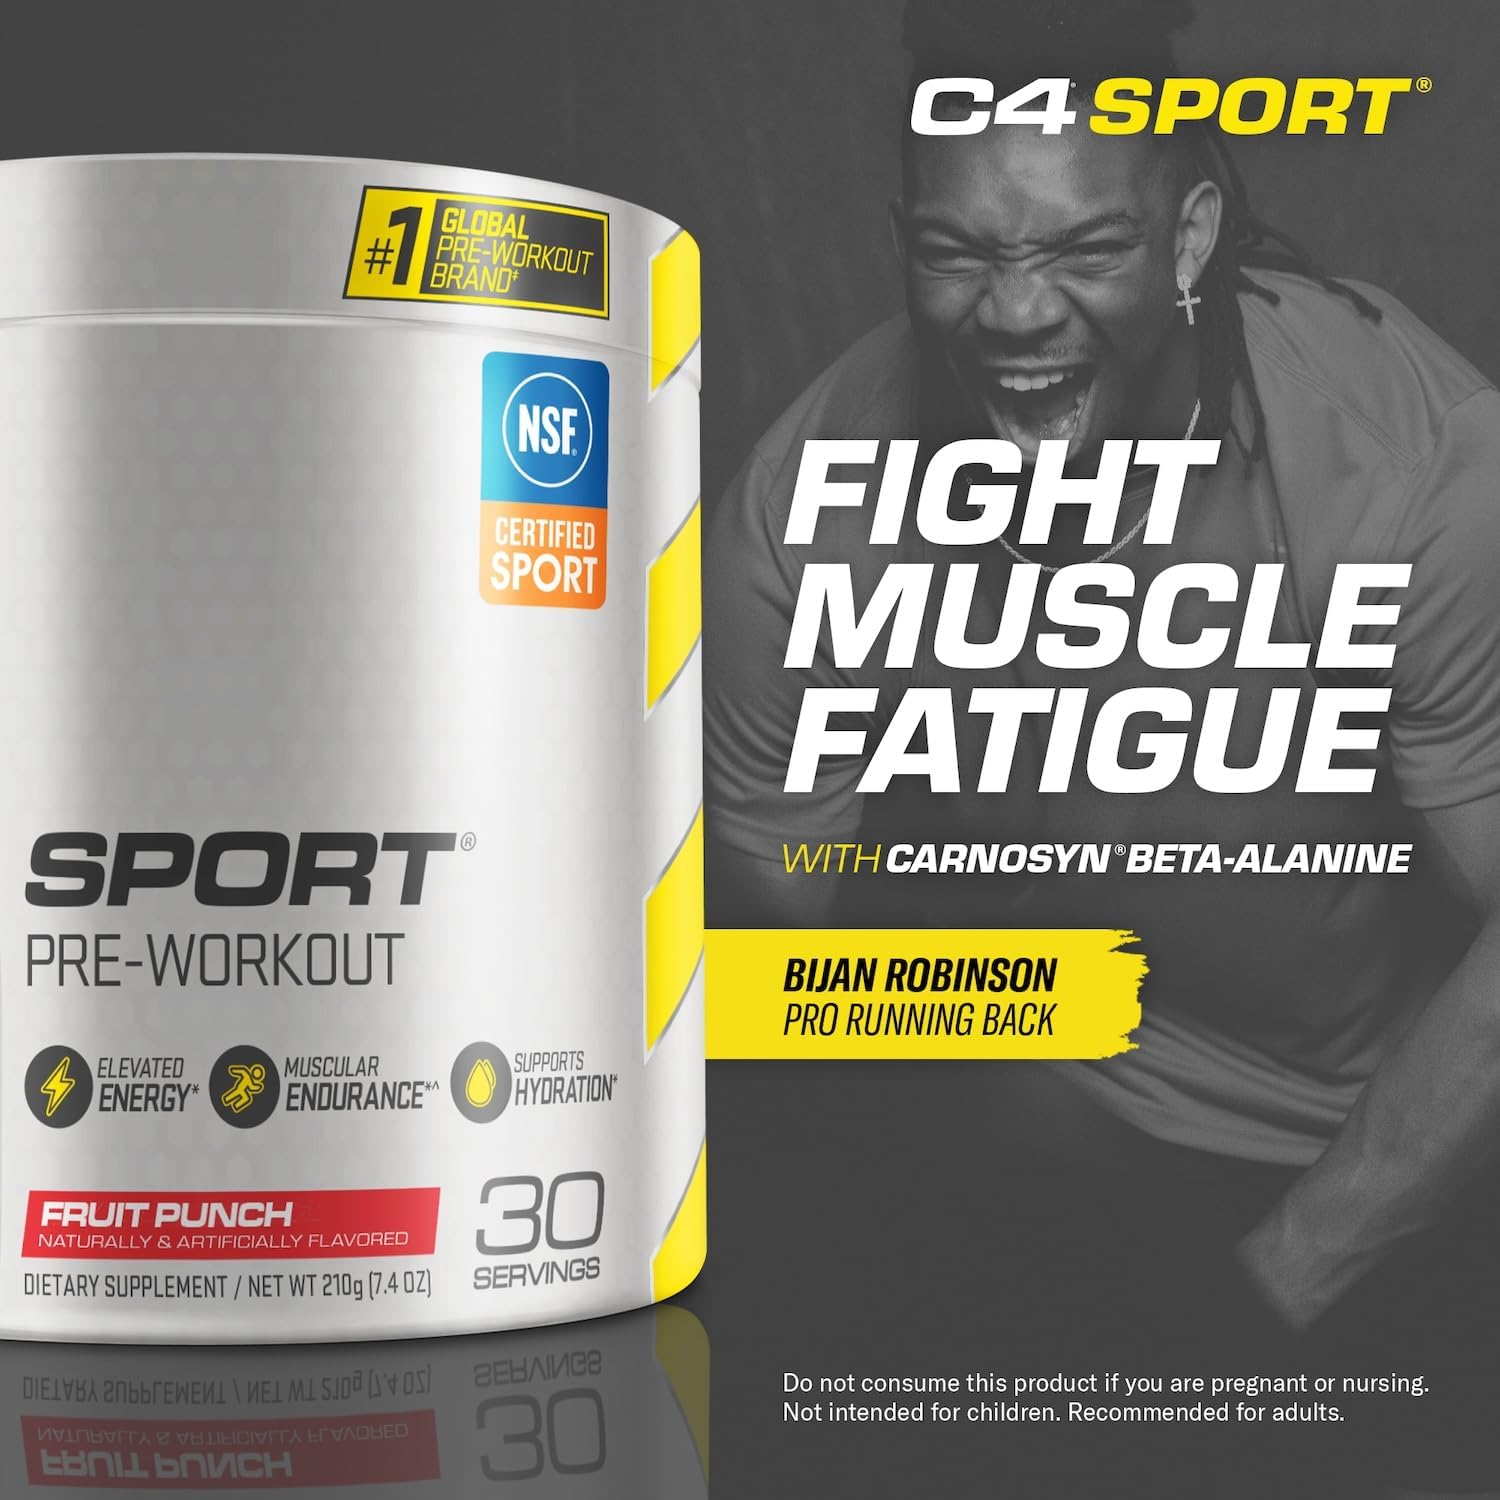 Cellucor C4 Sport Pre Workout Powder Fruit Punch - NSF Certified for Sport | 30 Servings, Packaging may vary. : Health & Household